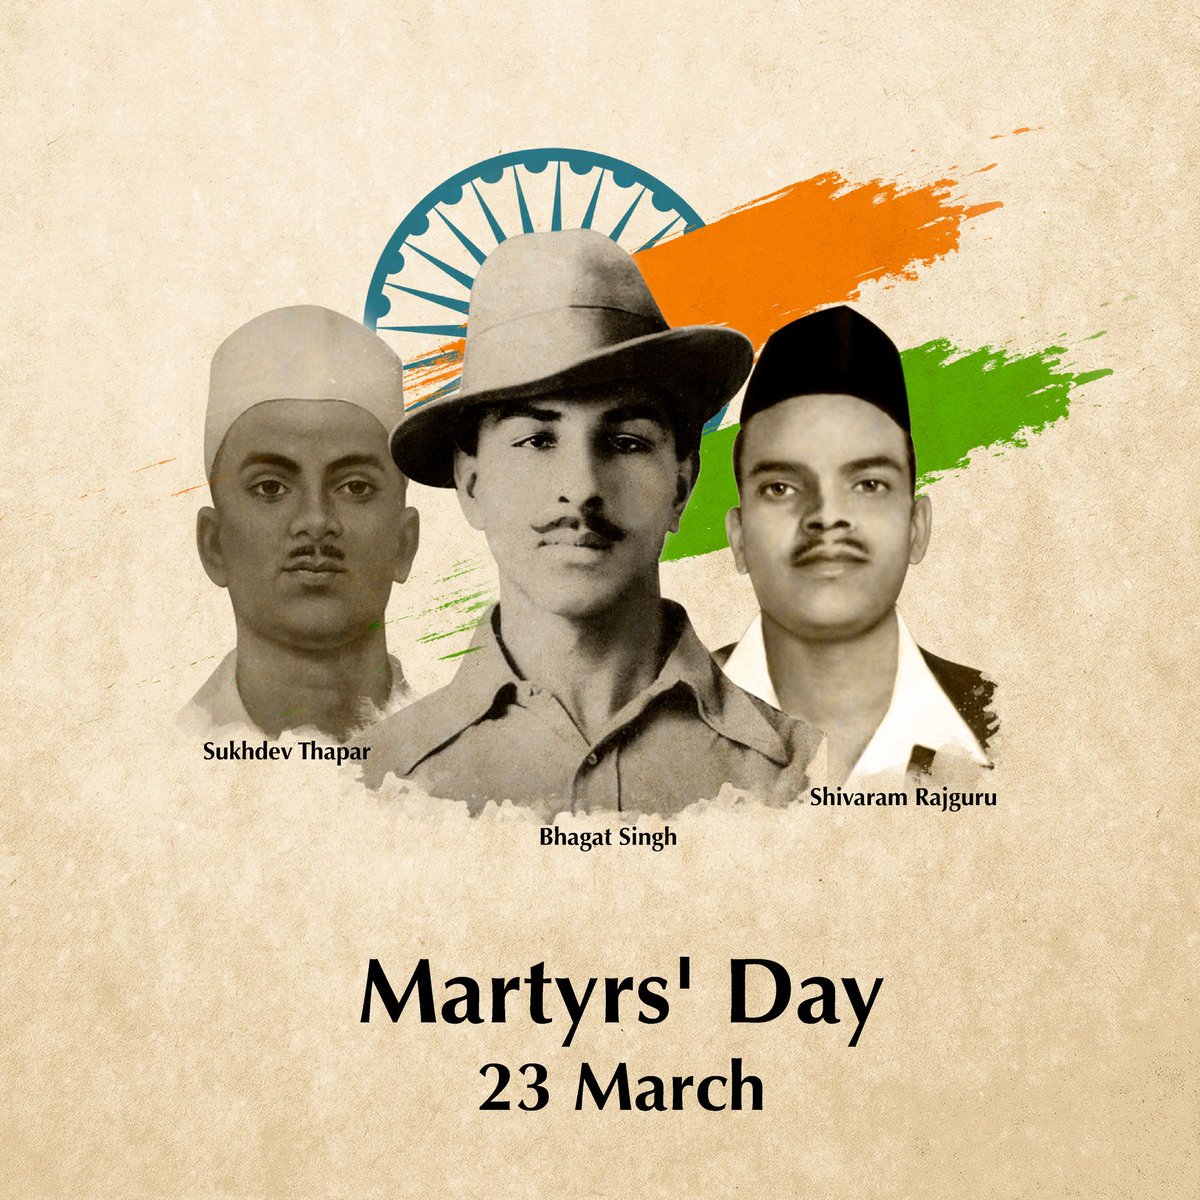 Remembering the 3 great men, Sukhdev, Bhagat Singh and Rajguru on their martyrdom day. Their love for the nation and values continue to inspire generations. #ShaheedDiwas #MartyrsDay